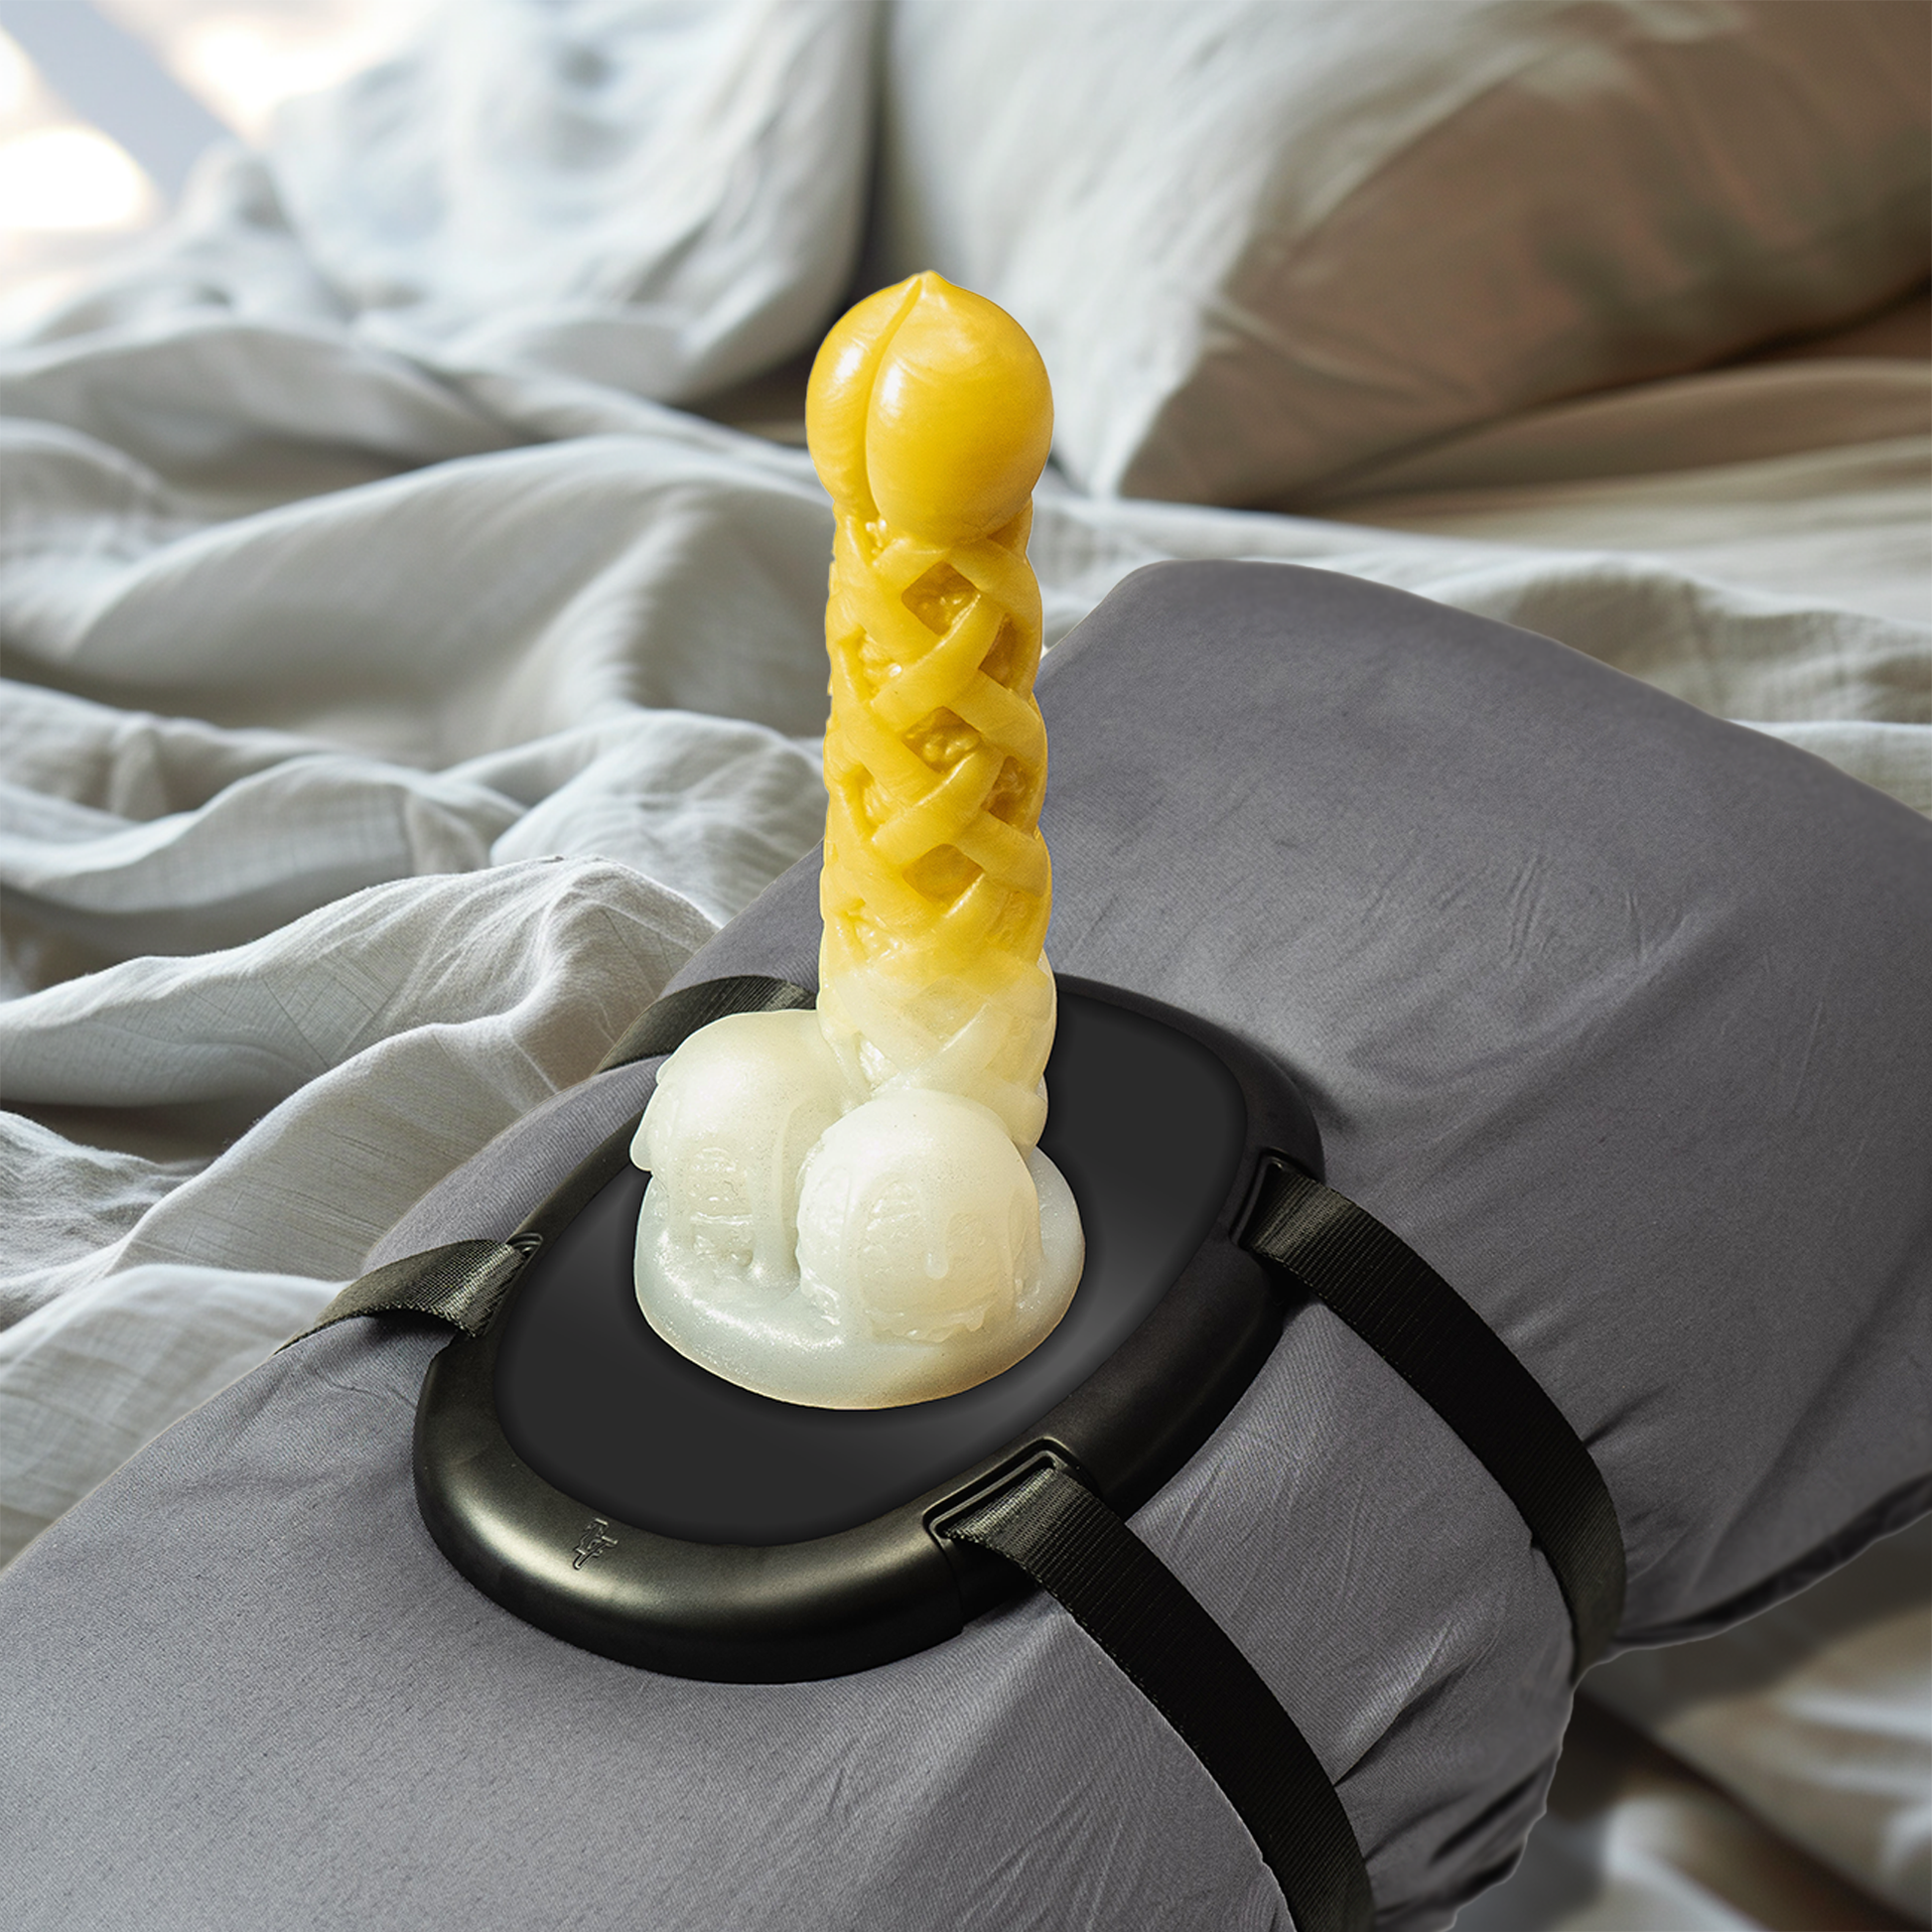 The Solo Saddle is a dildo mount, and dildo holder. Suction your suction cup dildos to the Solo Saddle dildo mount to create the perfect addition to solo or partner play. This dildo mount straps securely to any pillow, rolled-up blanket or towel, instantly turning into a sex pillow. Comes with two adjustable nylon straps. 